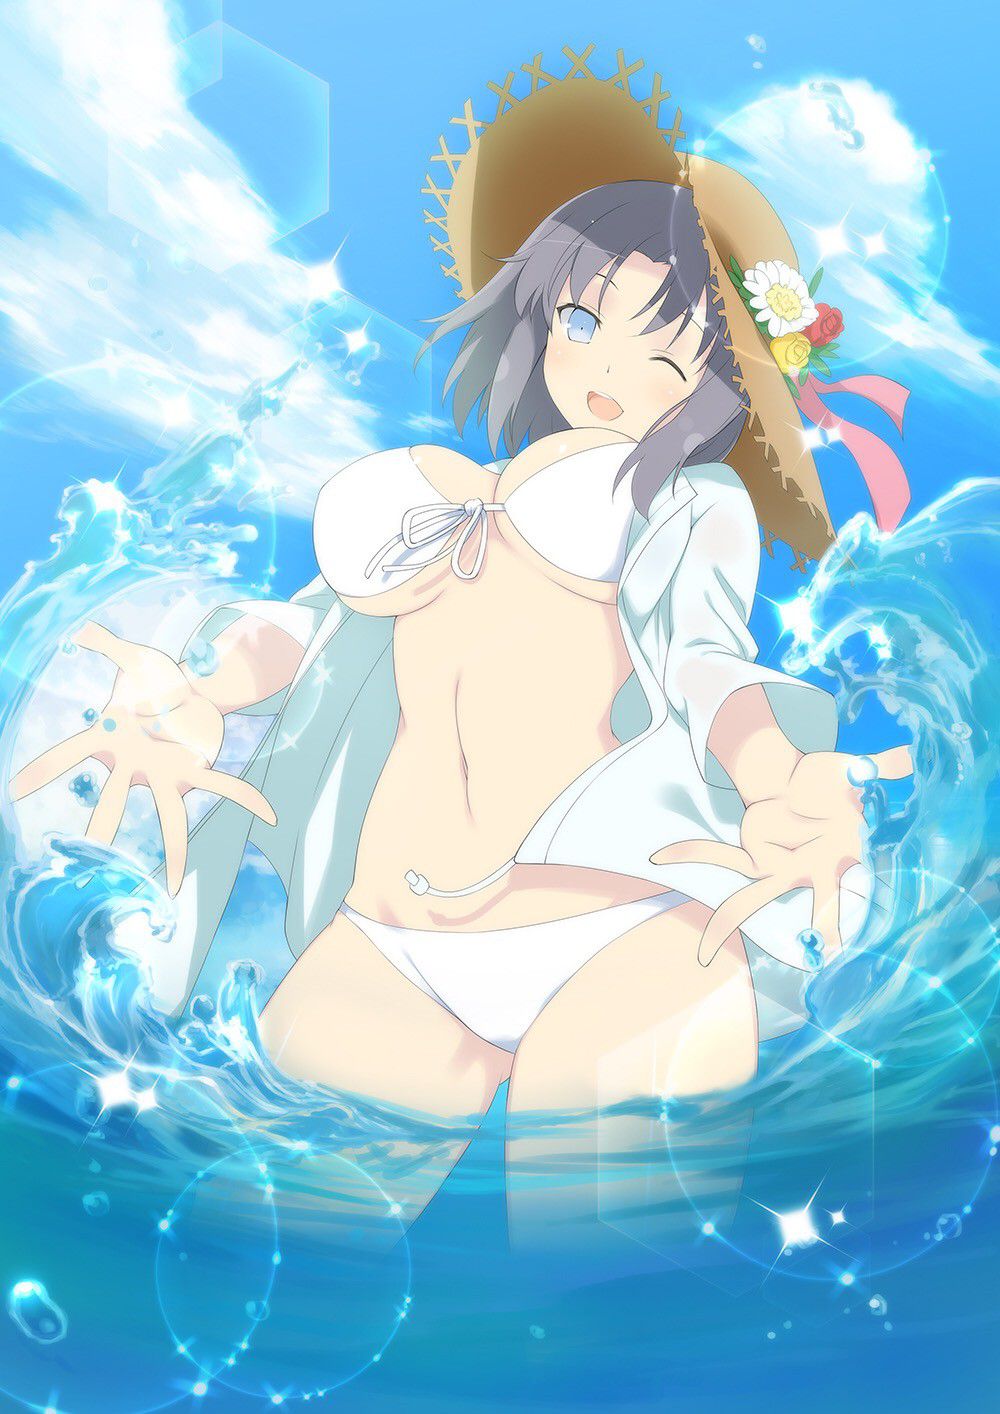 Thread to complete an image of 閃乱 カグラ which I collected so far 11